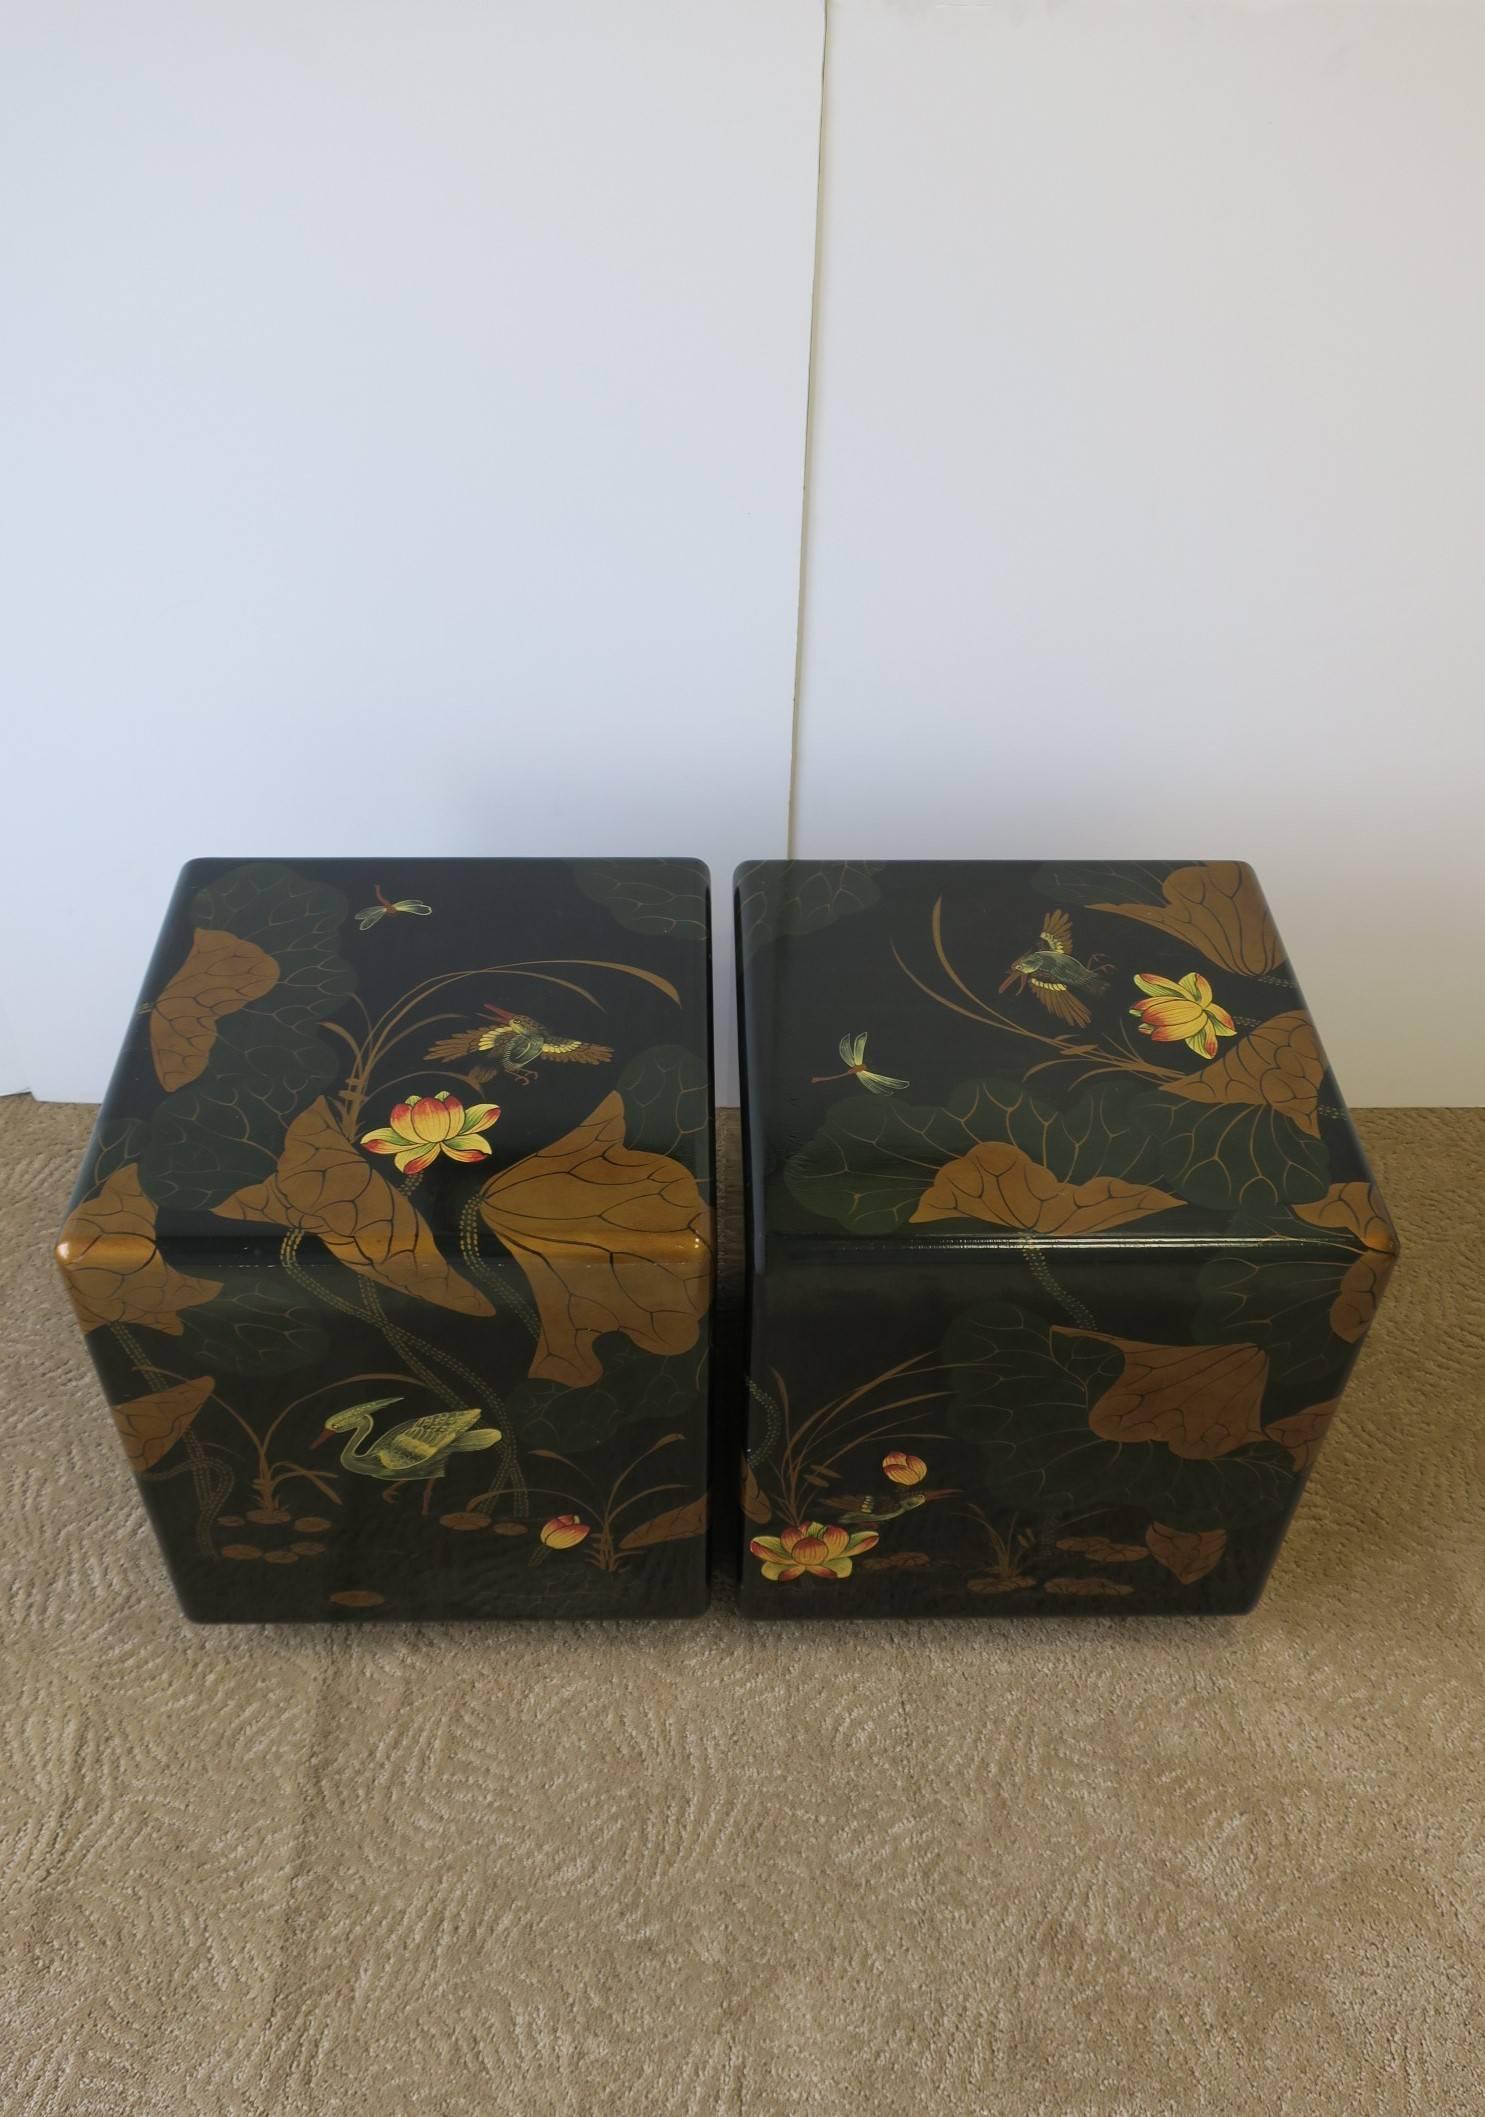 A beautiful pair of vintage Modern style black lacquer side or end table - or together as a coffee/cocktail table. Tables feature detailed birds, lotus flower and leaf design. Rounded corners and edges. Colors include: tables predominantly feature